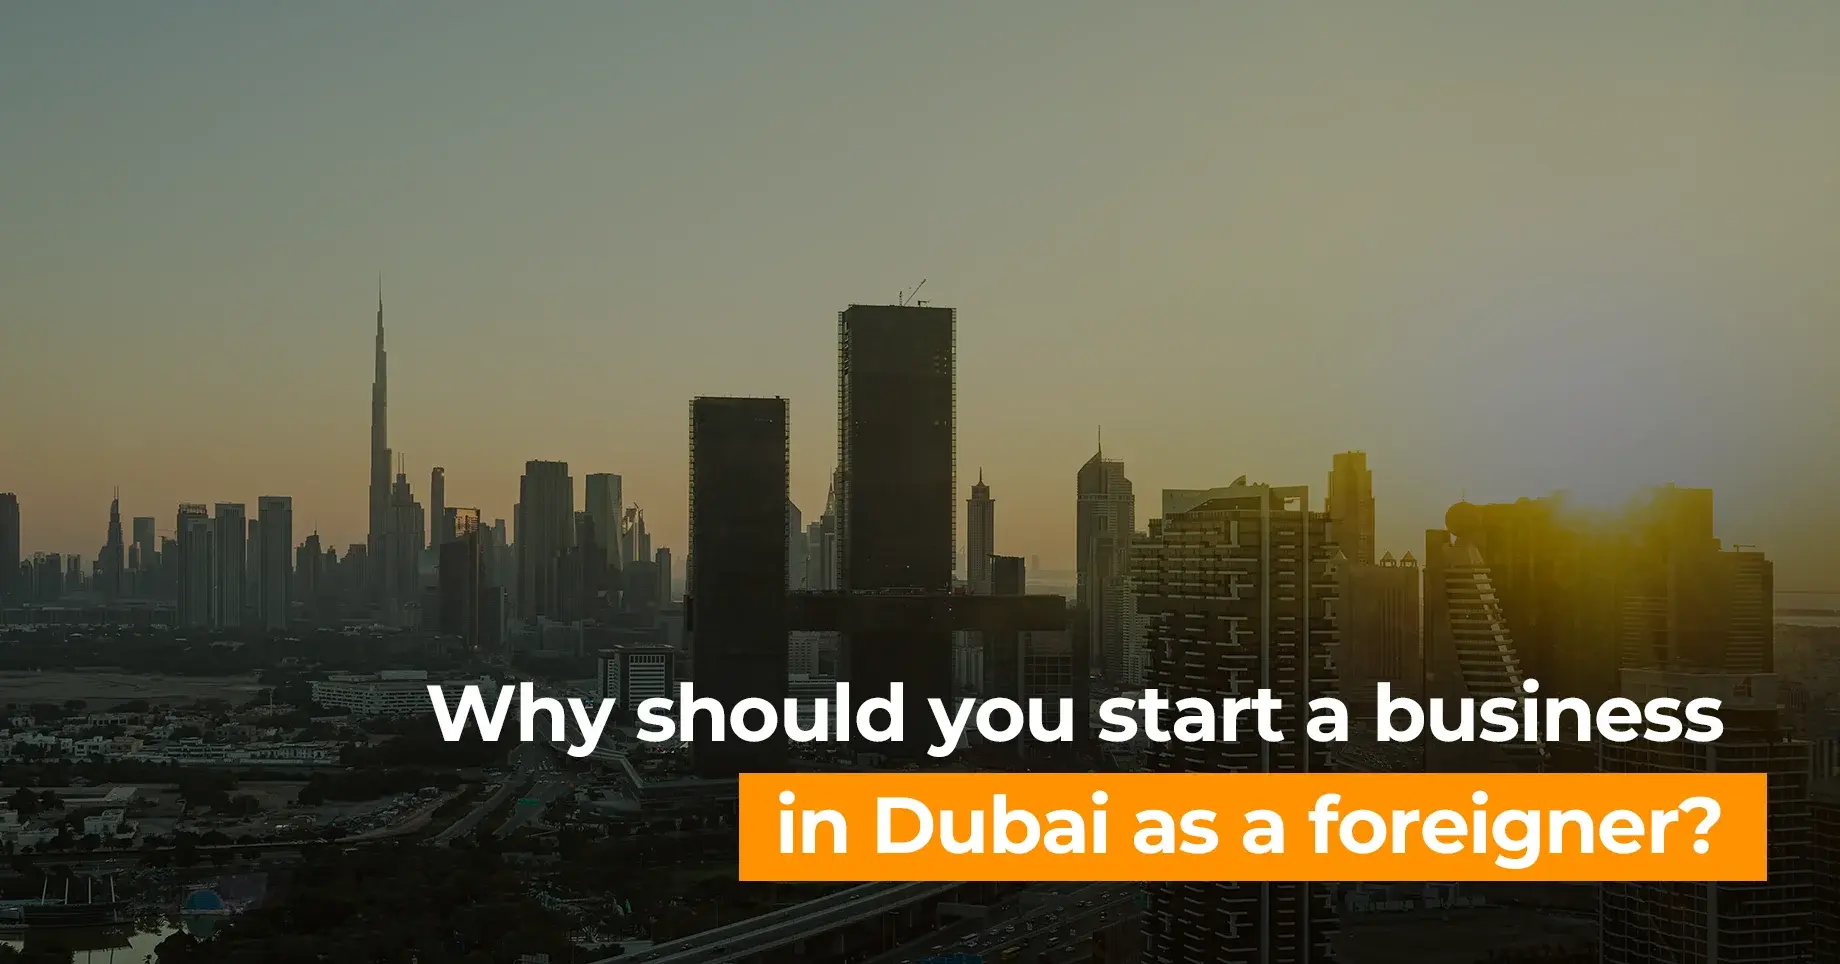 Why should you start business in Dubai as a foreigner?